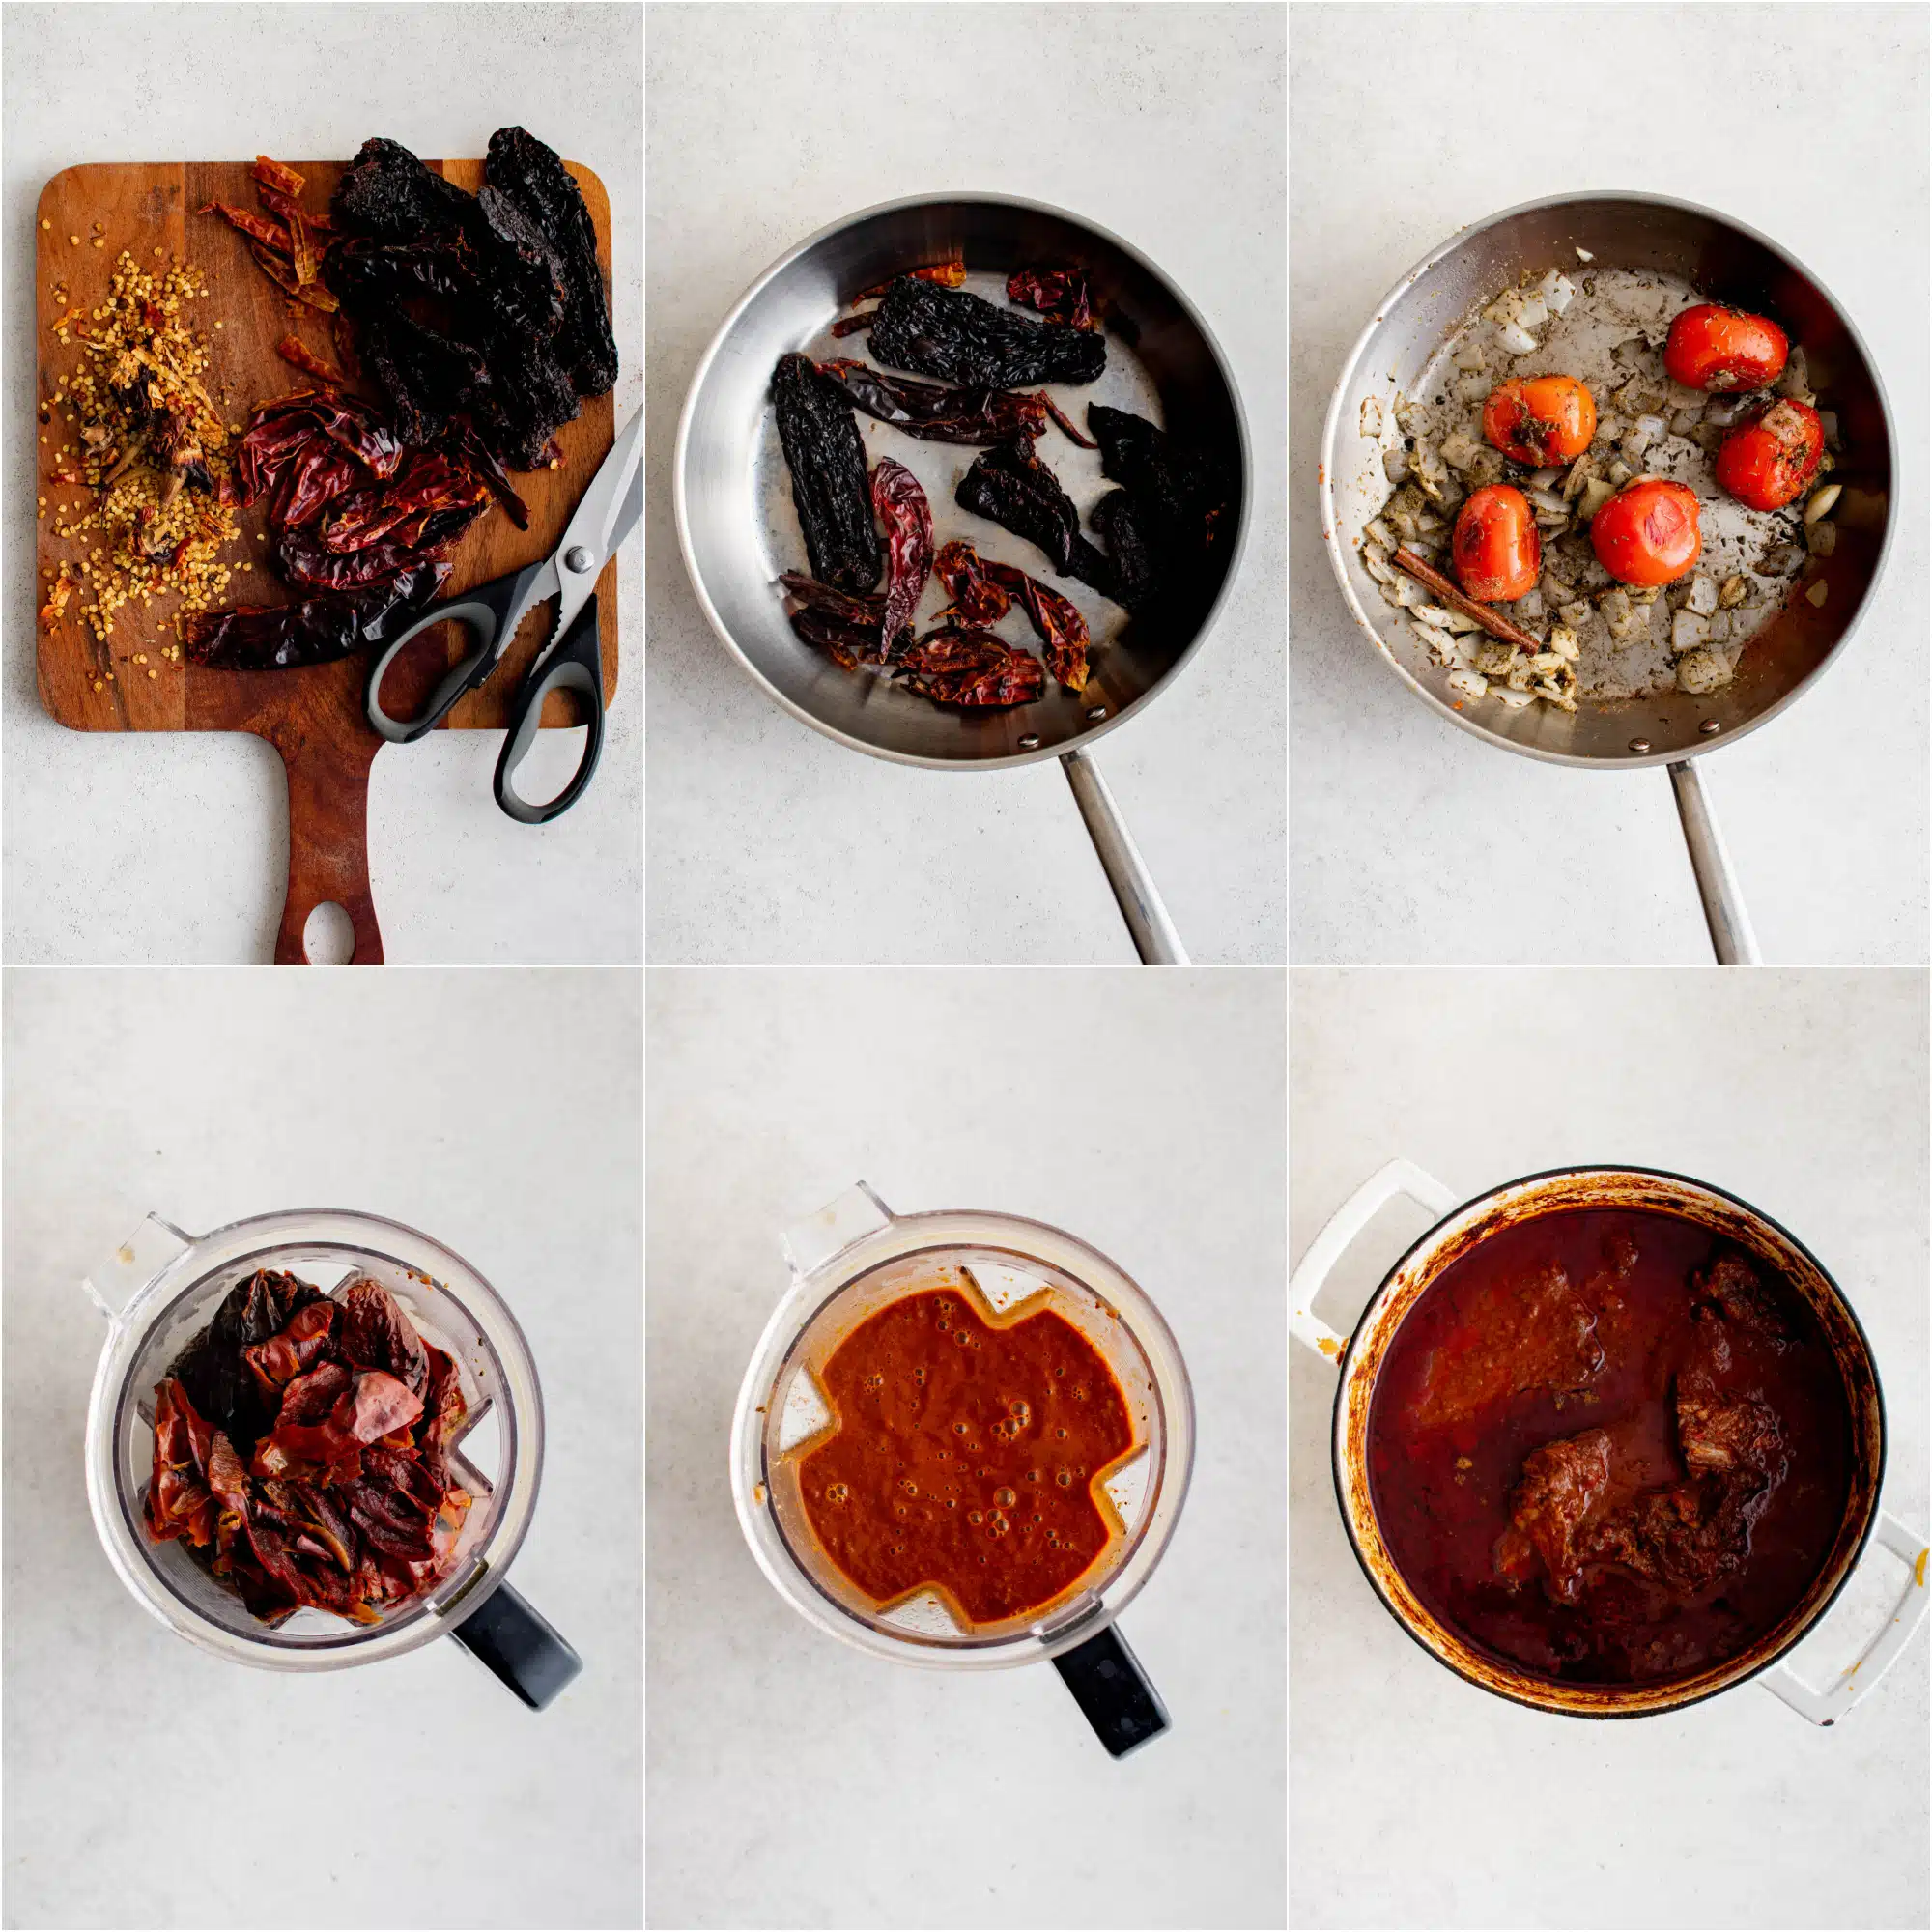 Six images showing the steps to make beef birria. The first image shows various dried chiles on a cutting board with the seeds removed, the second image shows the dried chilies toasting in a dry skillet, the third image shows onion, spices, and whole tomatoes sauteing in a large skillet, the fourth image shows boiled and softened whole chiles in a large blender, the fifth image shows a blender filled with blended chiles, tomatoes, onions, and spices, and the sixth image shows beef simmering in a pot of birria sauce.